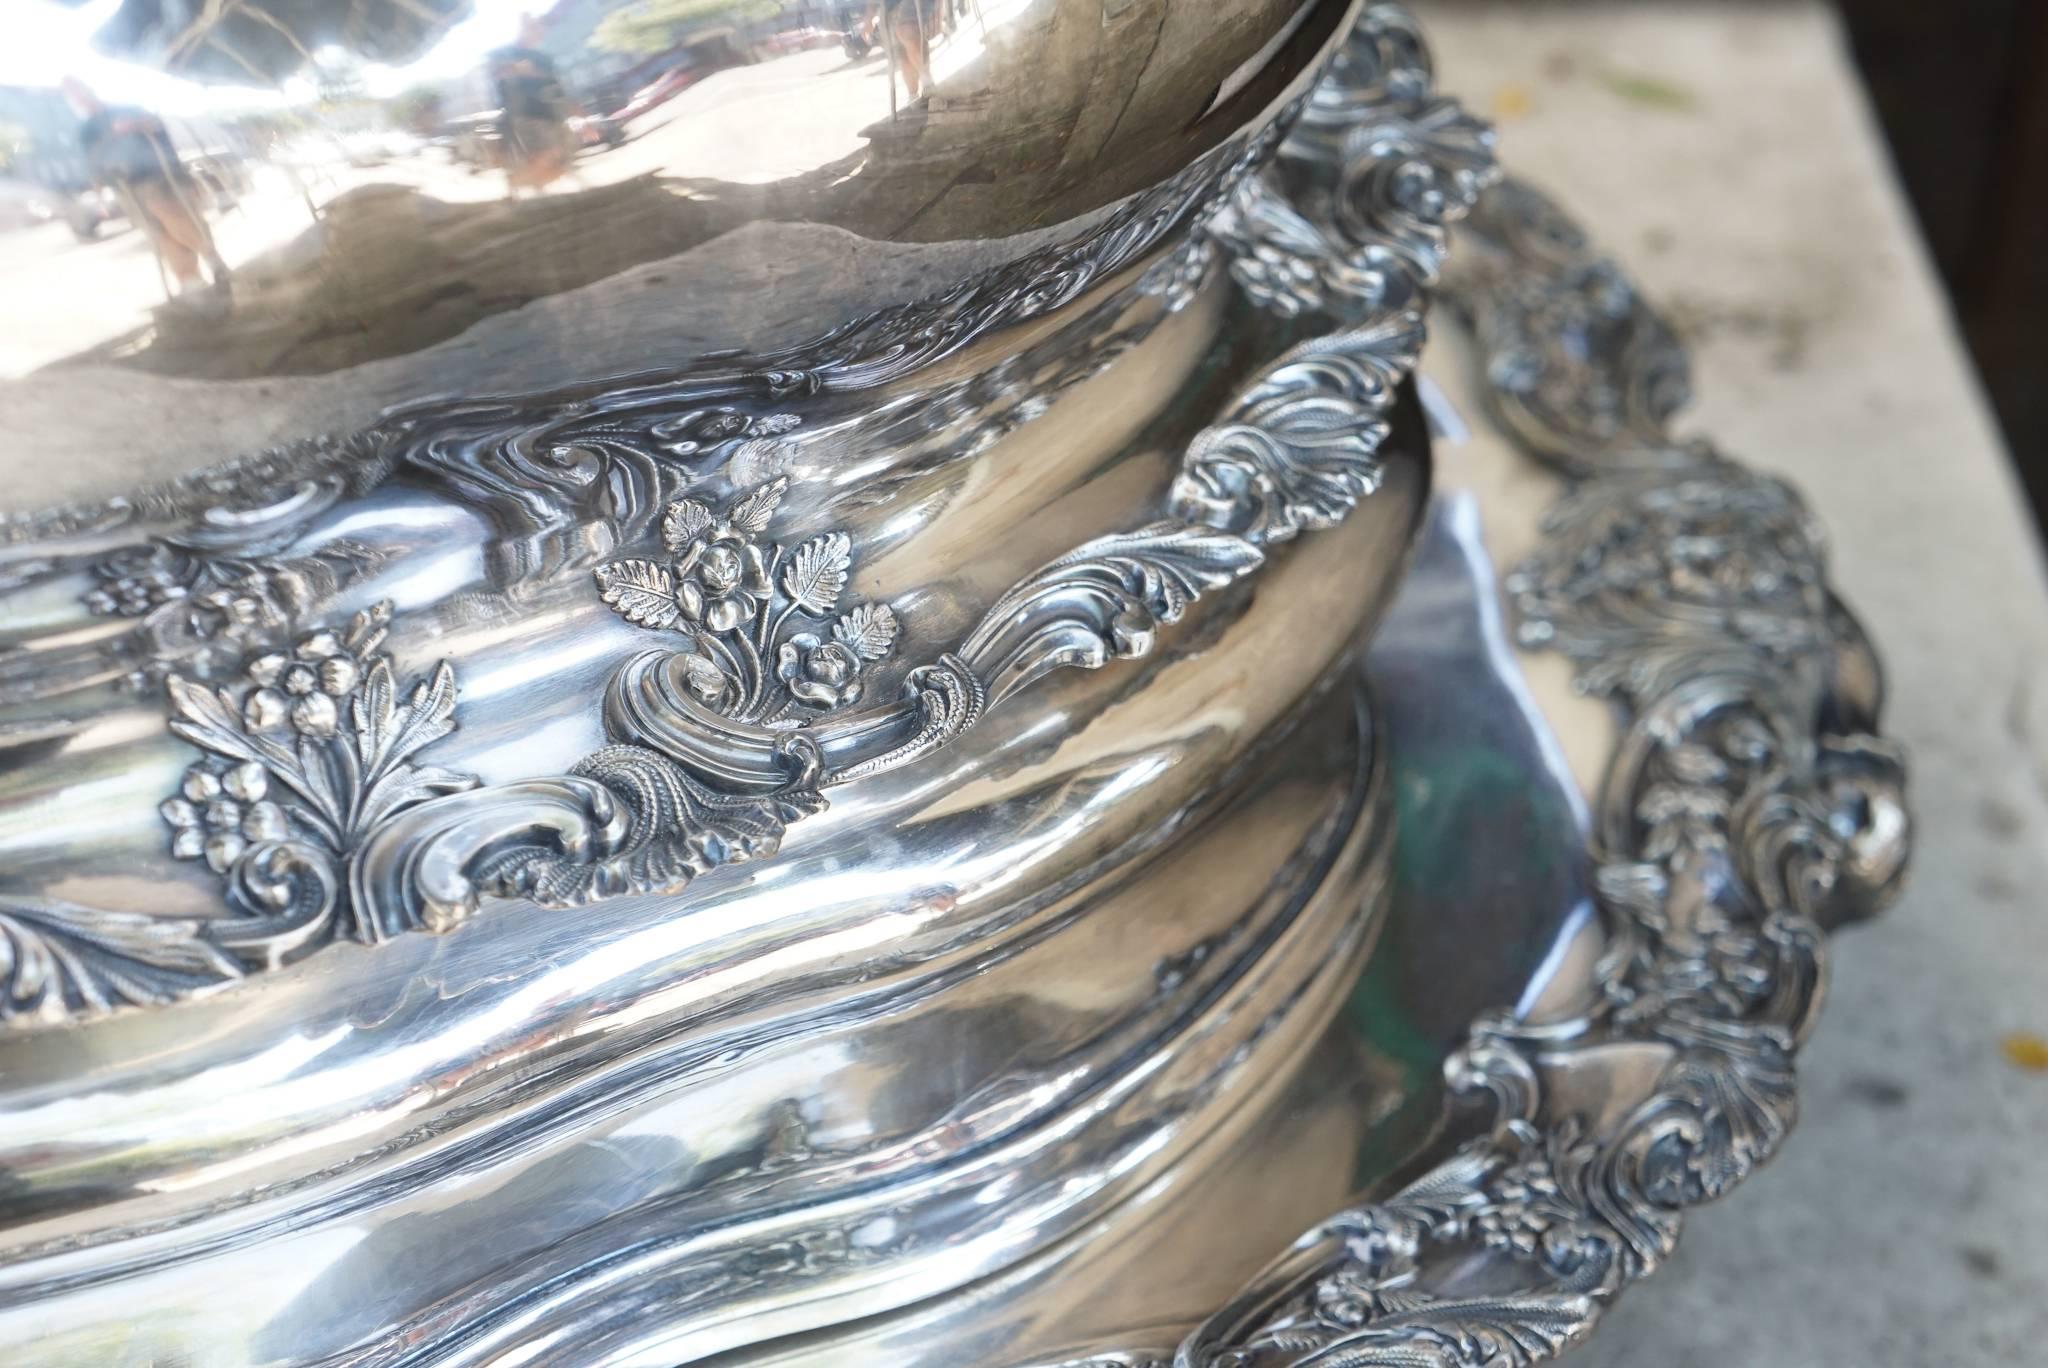 Great Britain (UK) Very Large and Impressive Victorian Silver Plate Covered Meat Platter